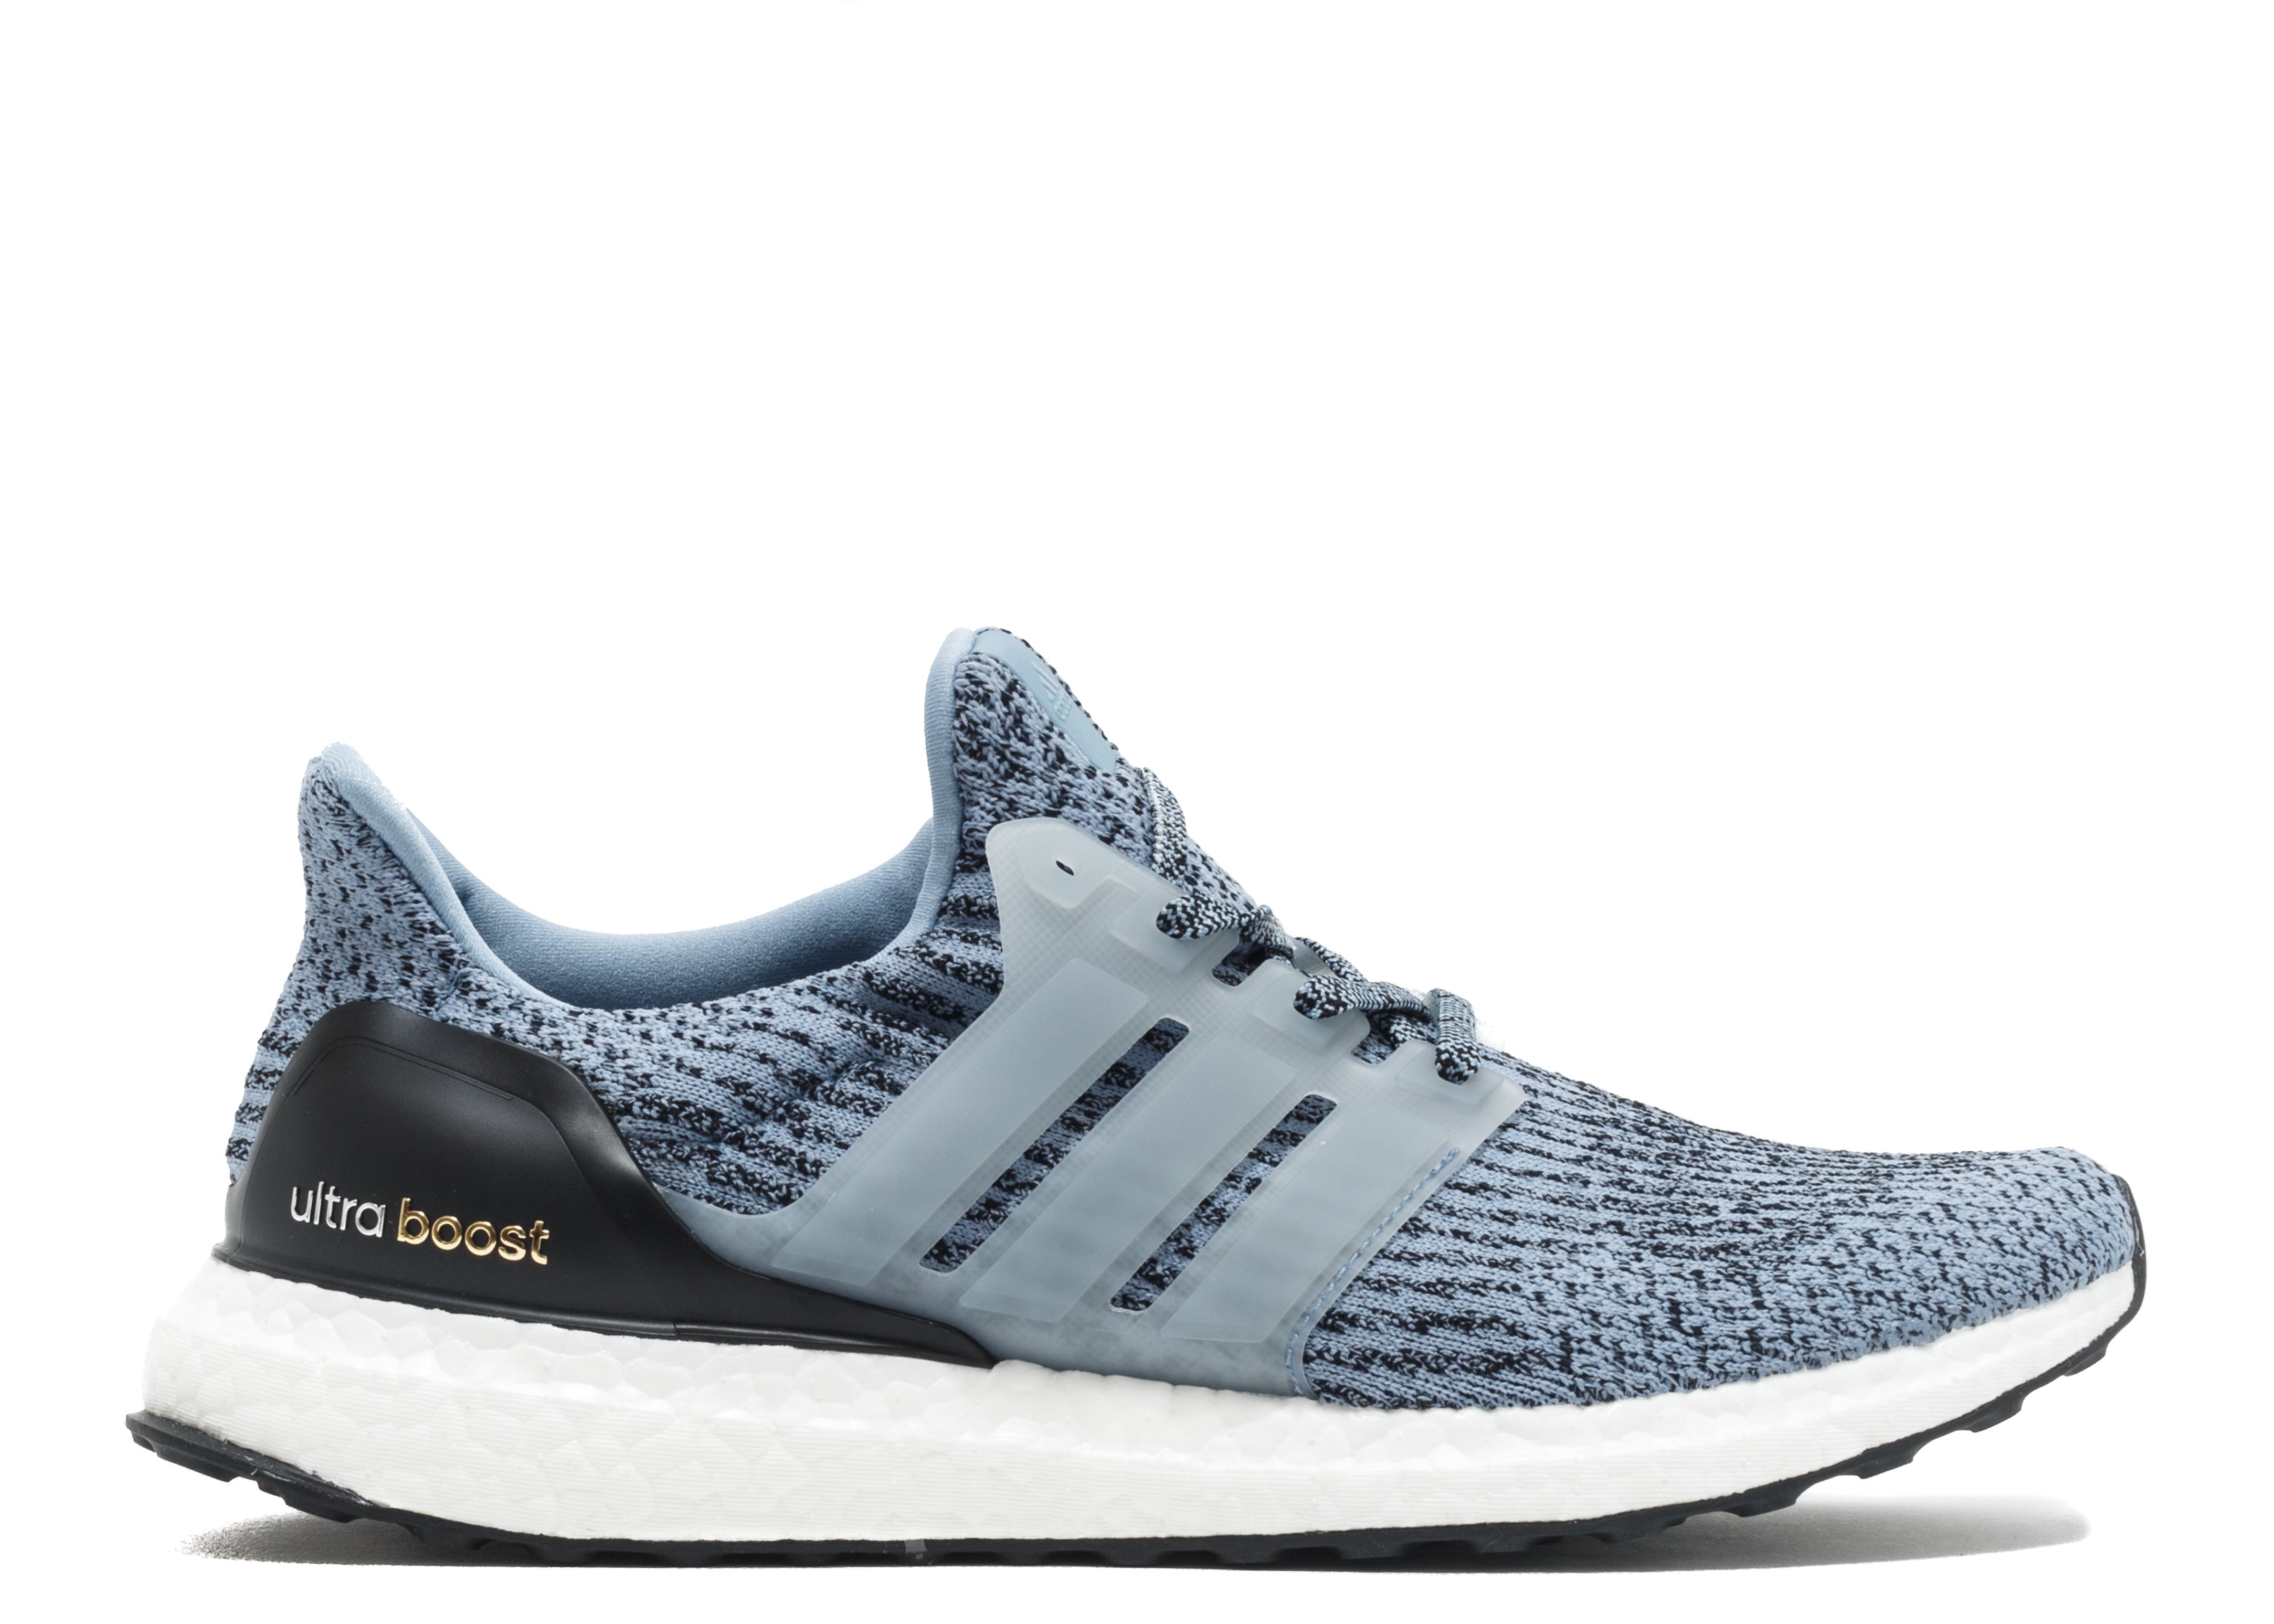 Adidas Ultra Boost Blue on Sale, 30% - aveclumiere.com